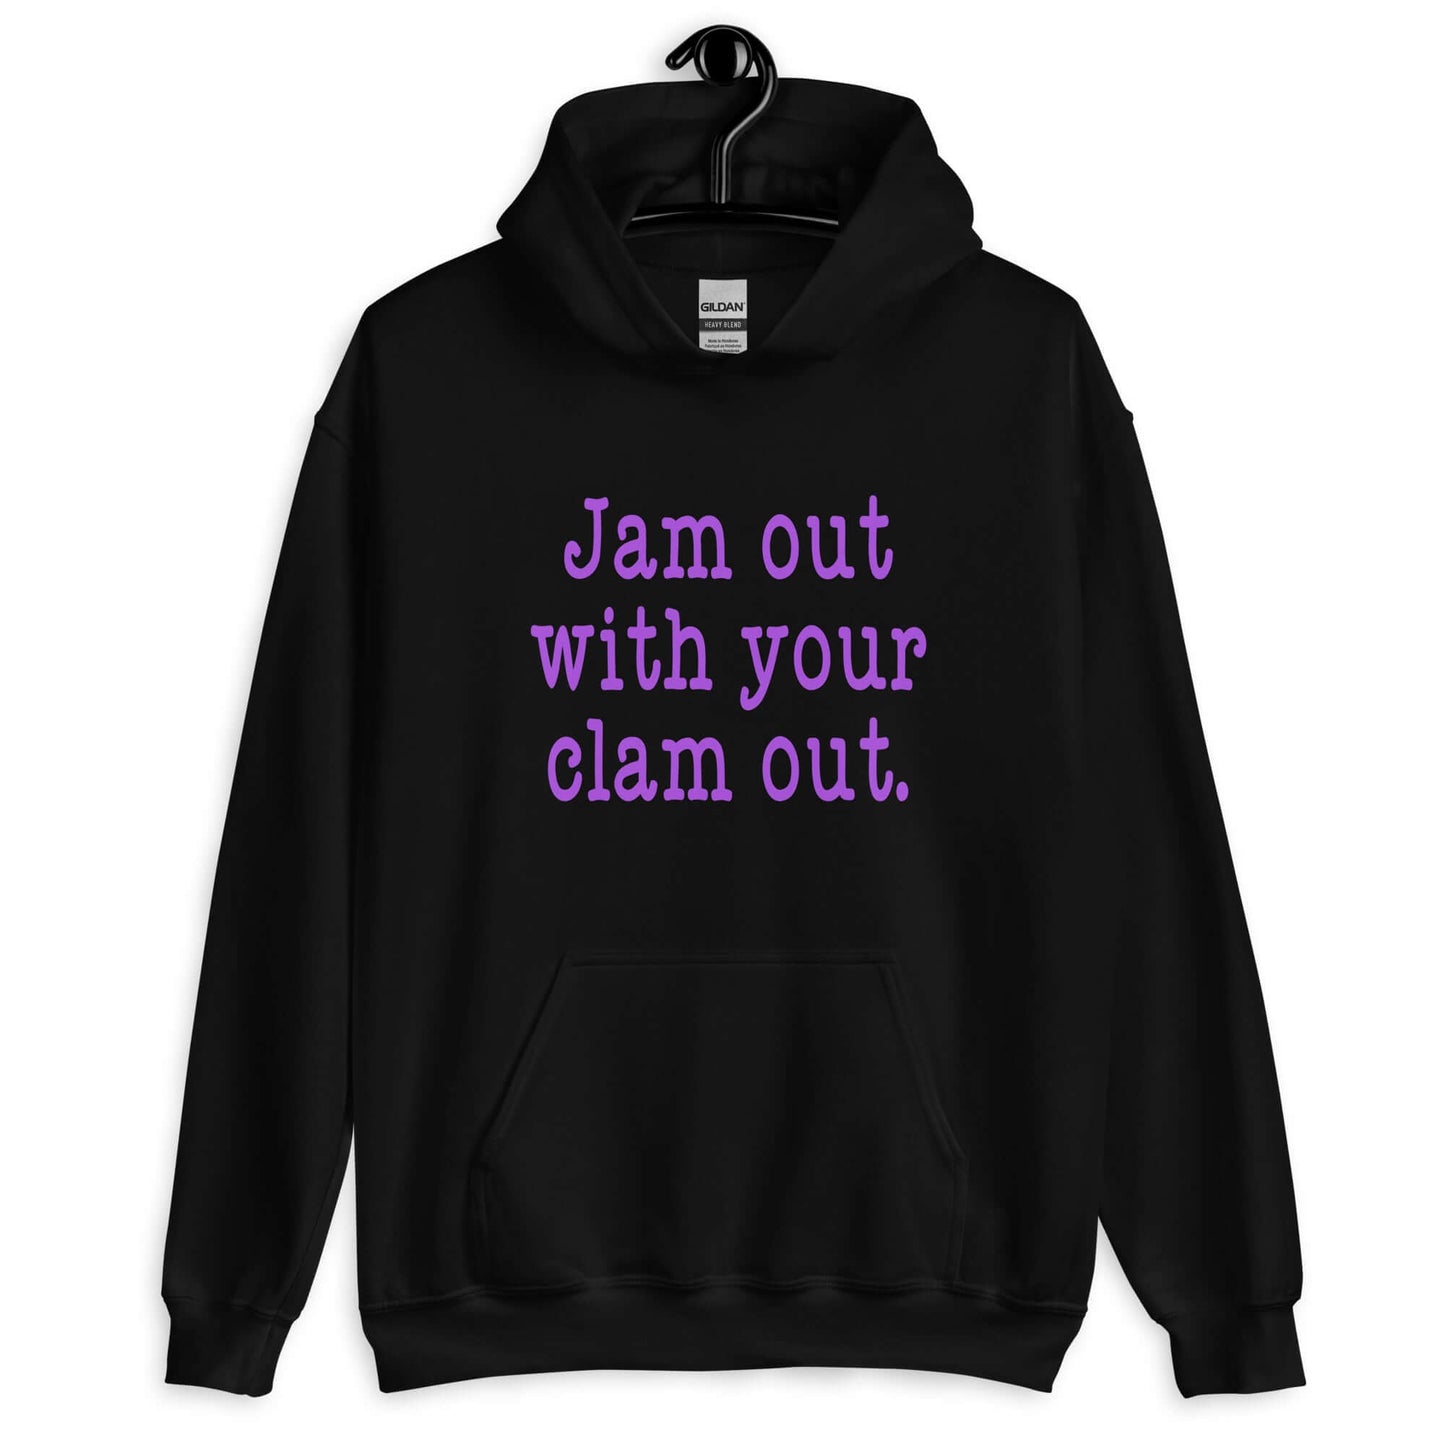 Black hoodie sweatshirt with the phrase Jam out with your clam out printed on the front in purple.